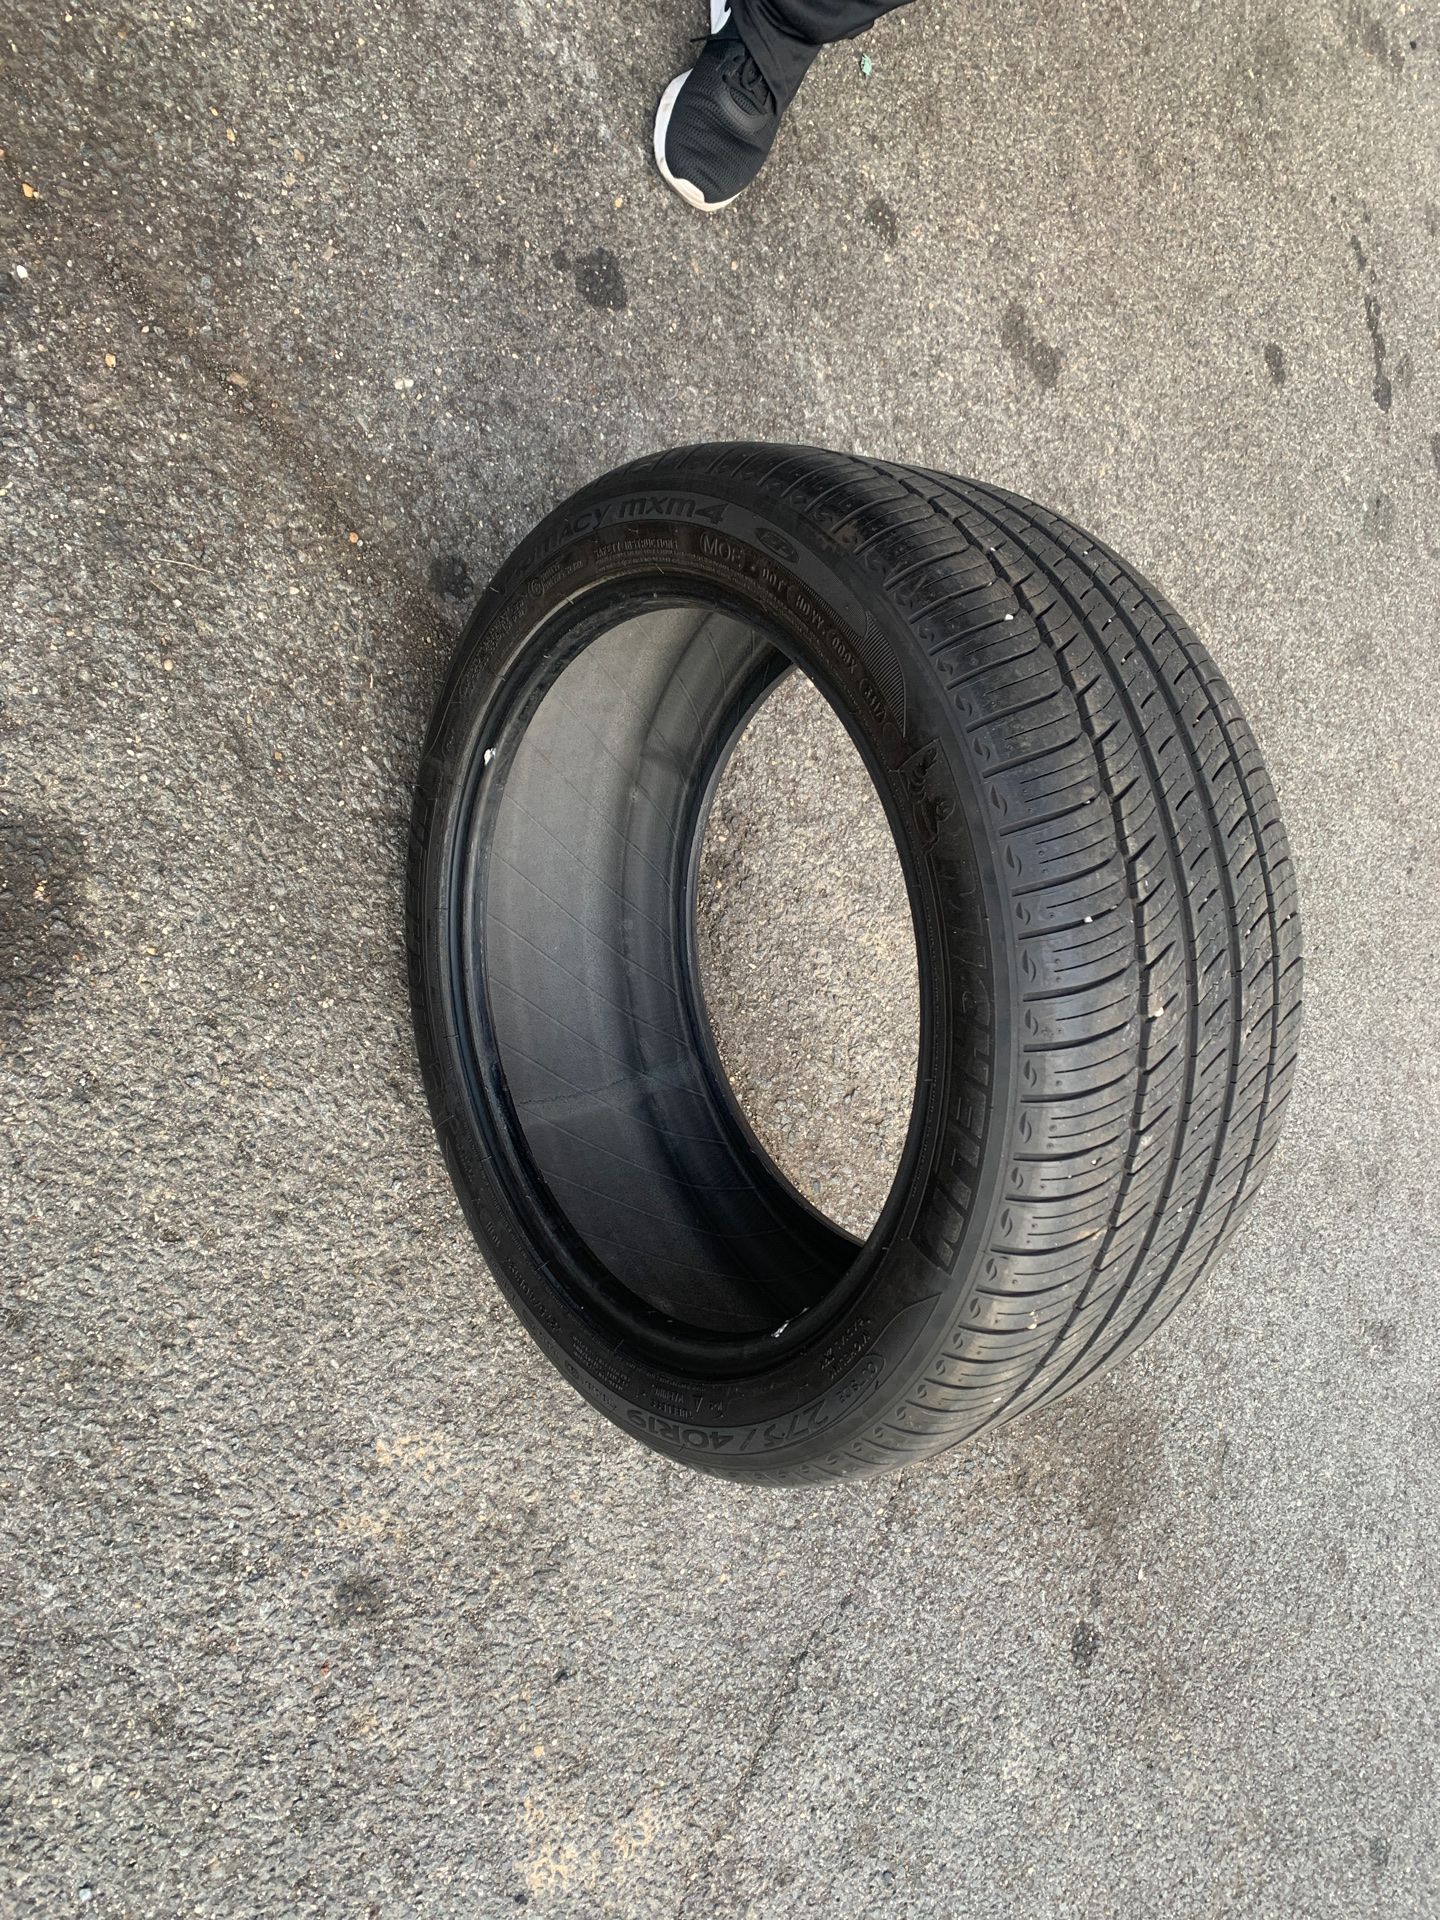 275/40/19 almost new tires just had for 1 month my car got total loss run flat tires michelin tires